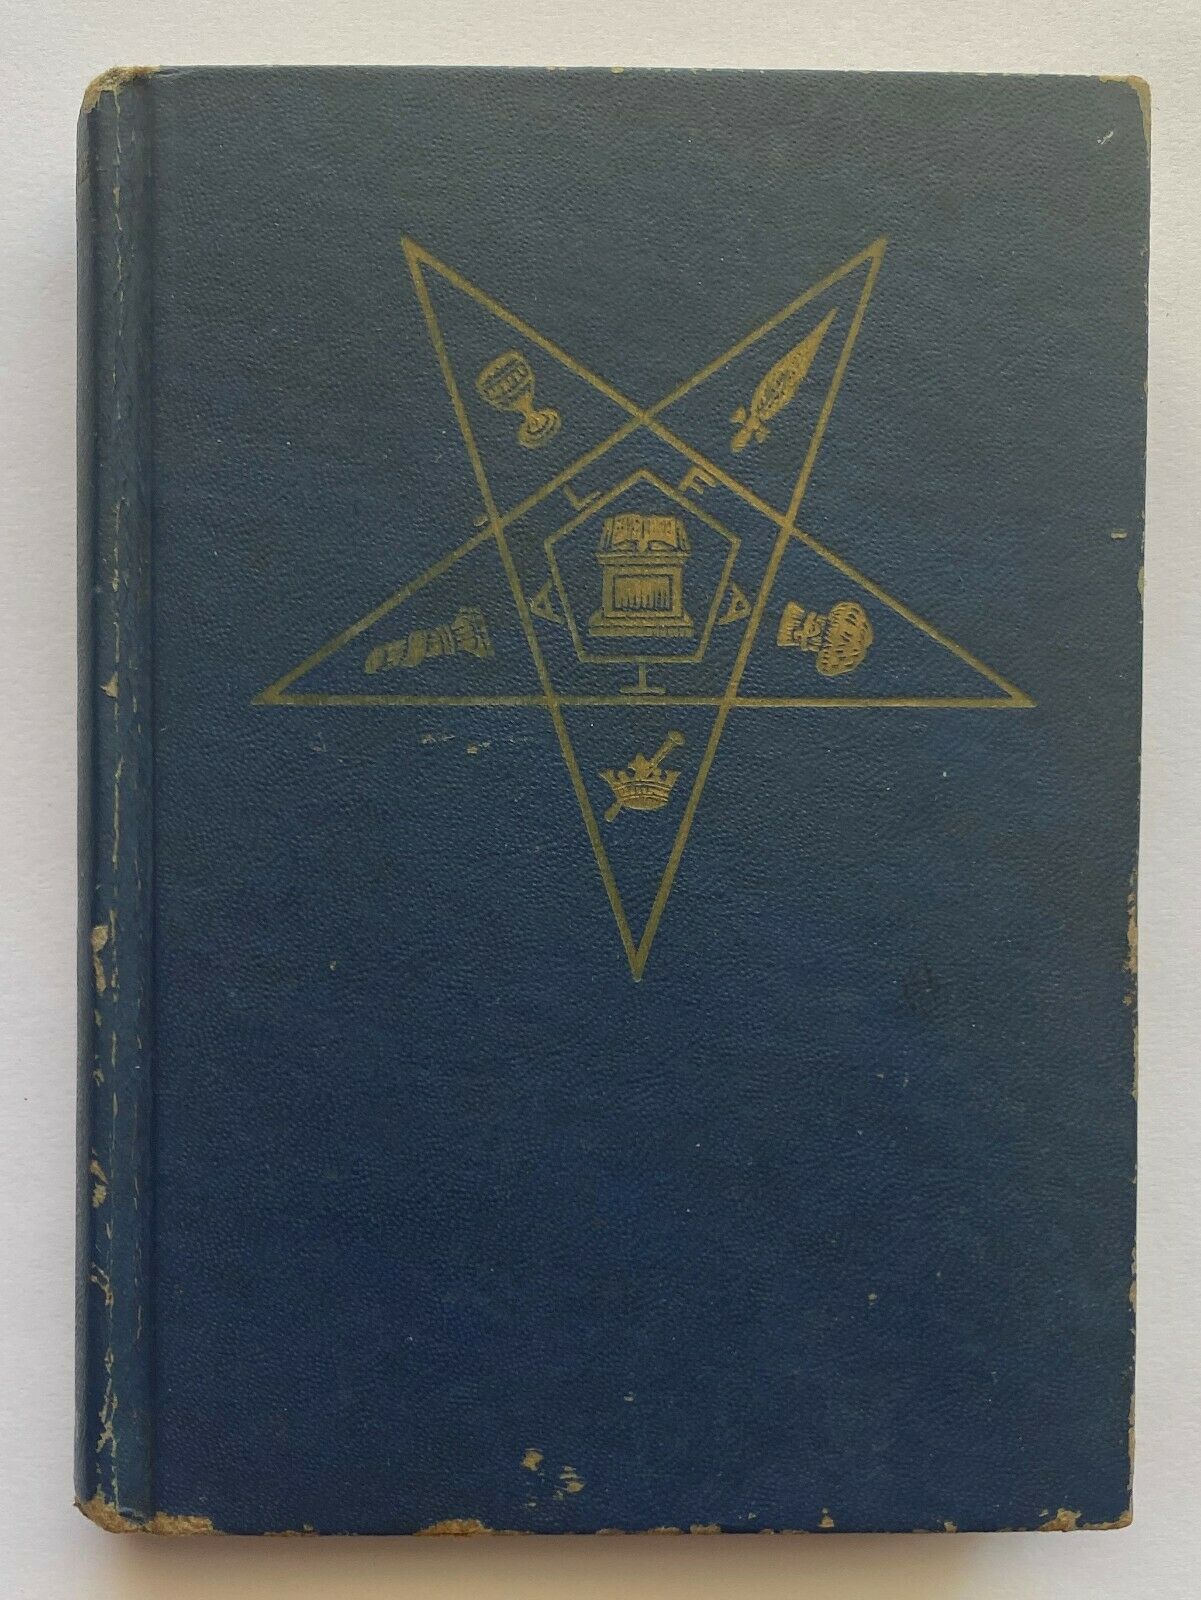 Adoptive Rite Ritual Order Of The Eastern Star Queen Of South Hardback 1952